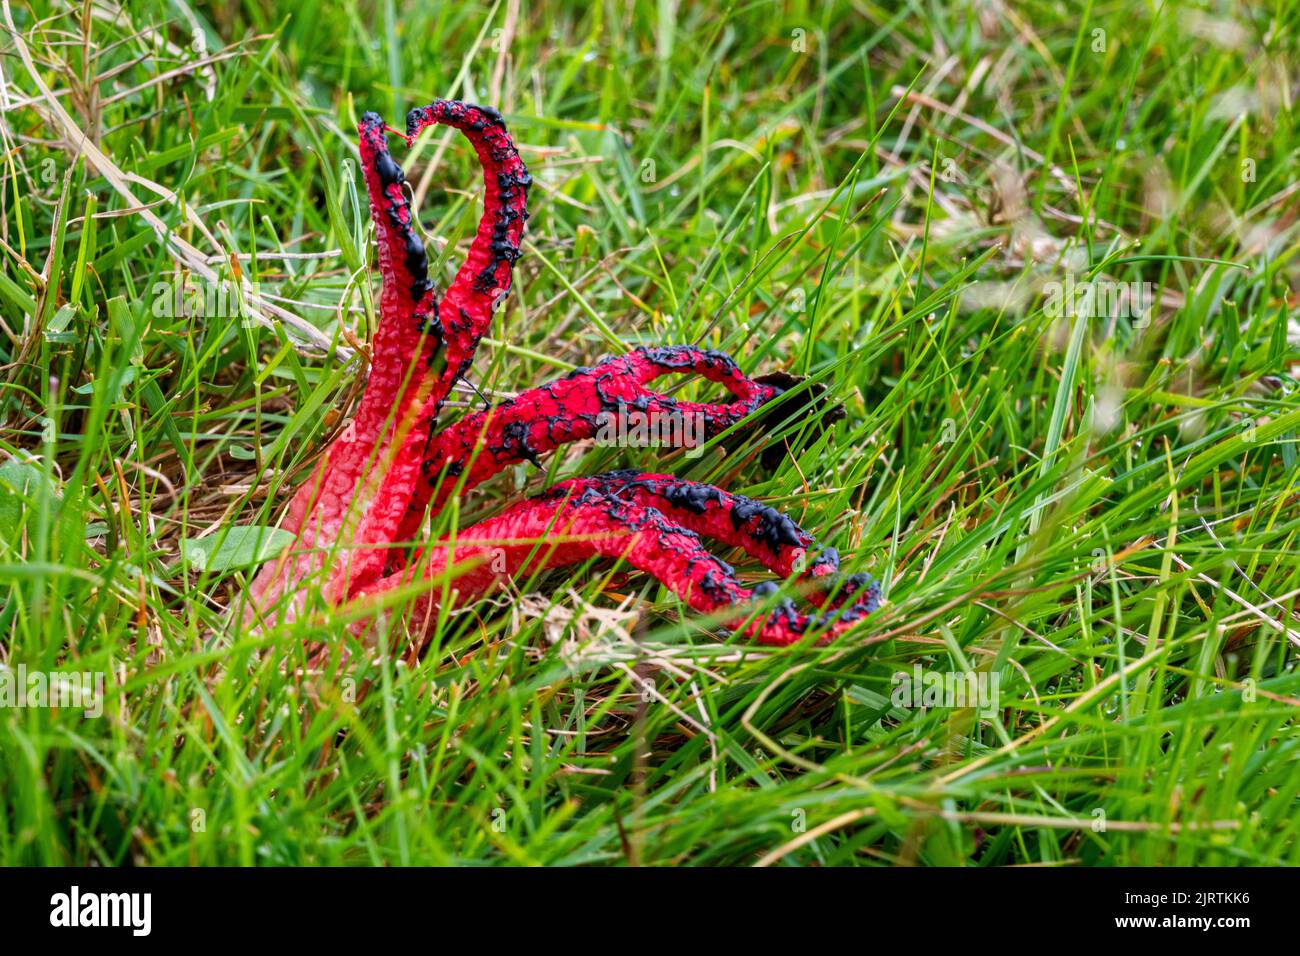 The fungus Clathrus archeri is commonly known as the octopus stinkhorn or the devil's fingers, here seen in Dartmoor National Park, Devon, UK. Stock Photo